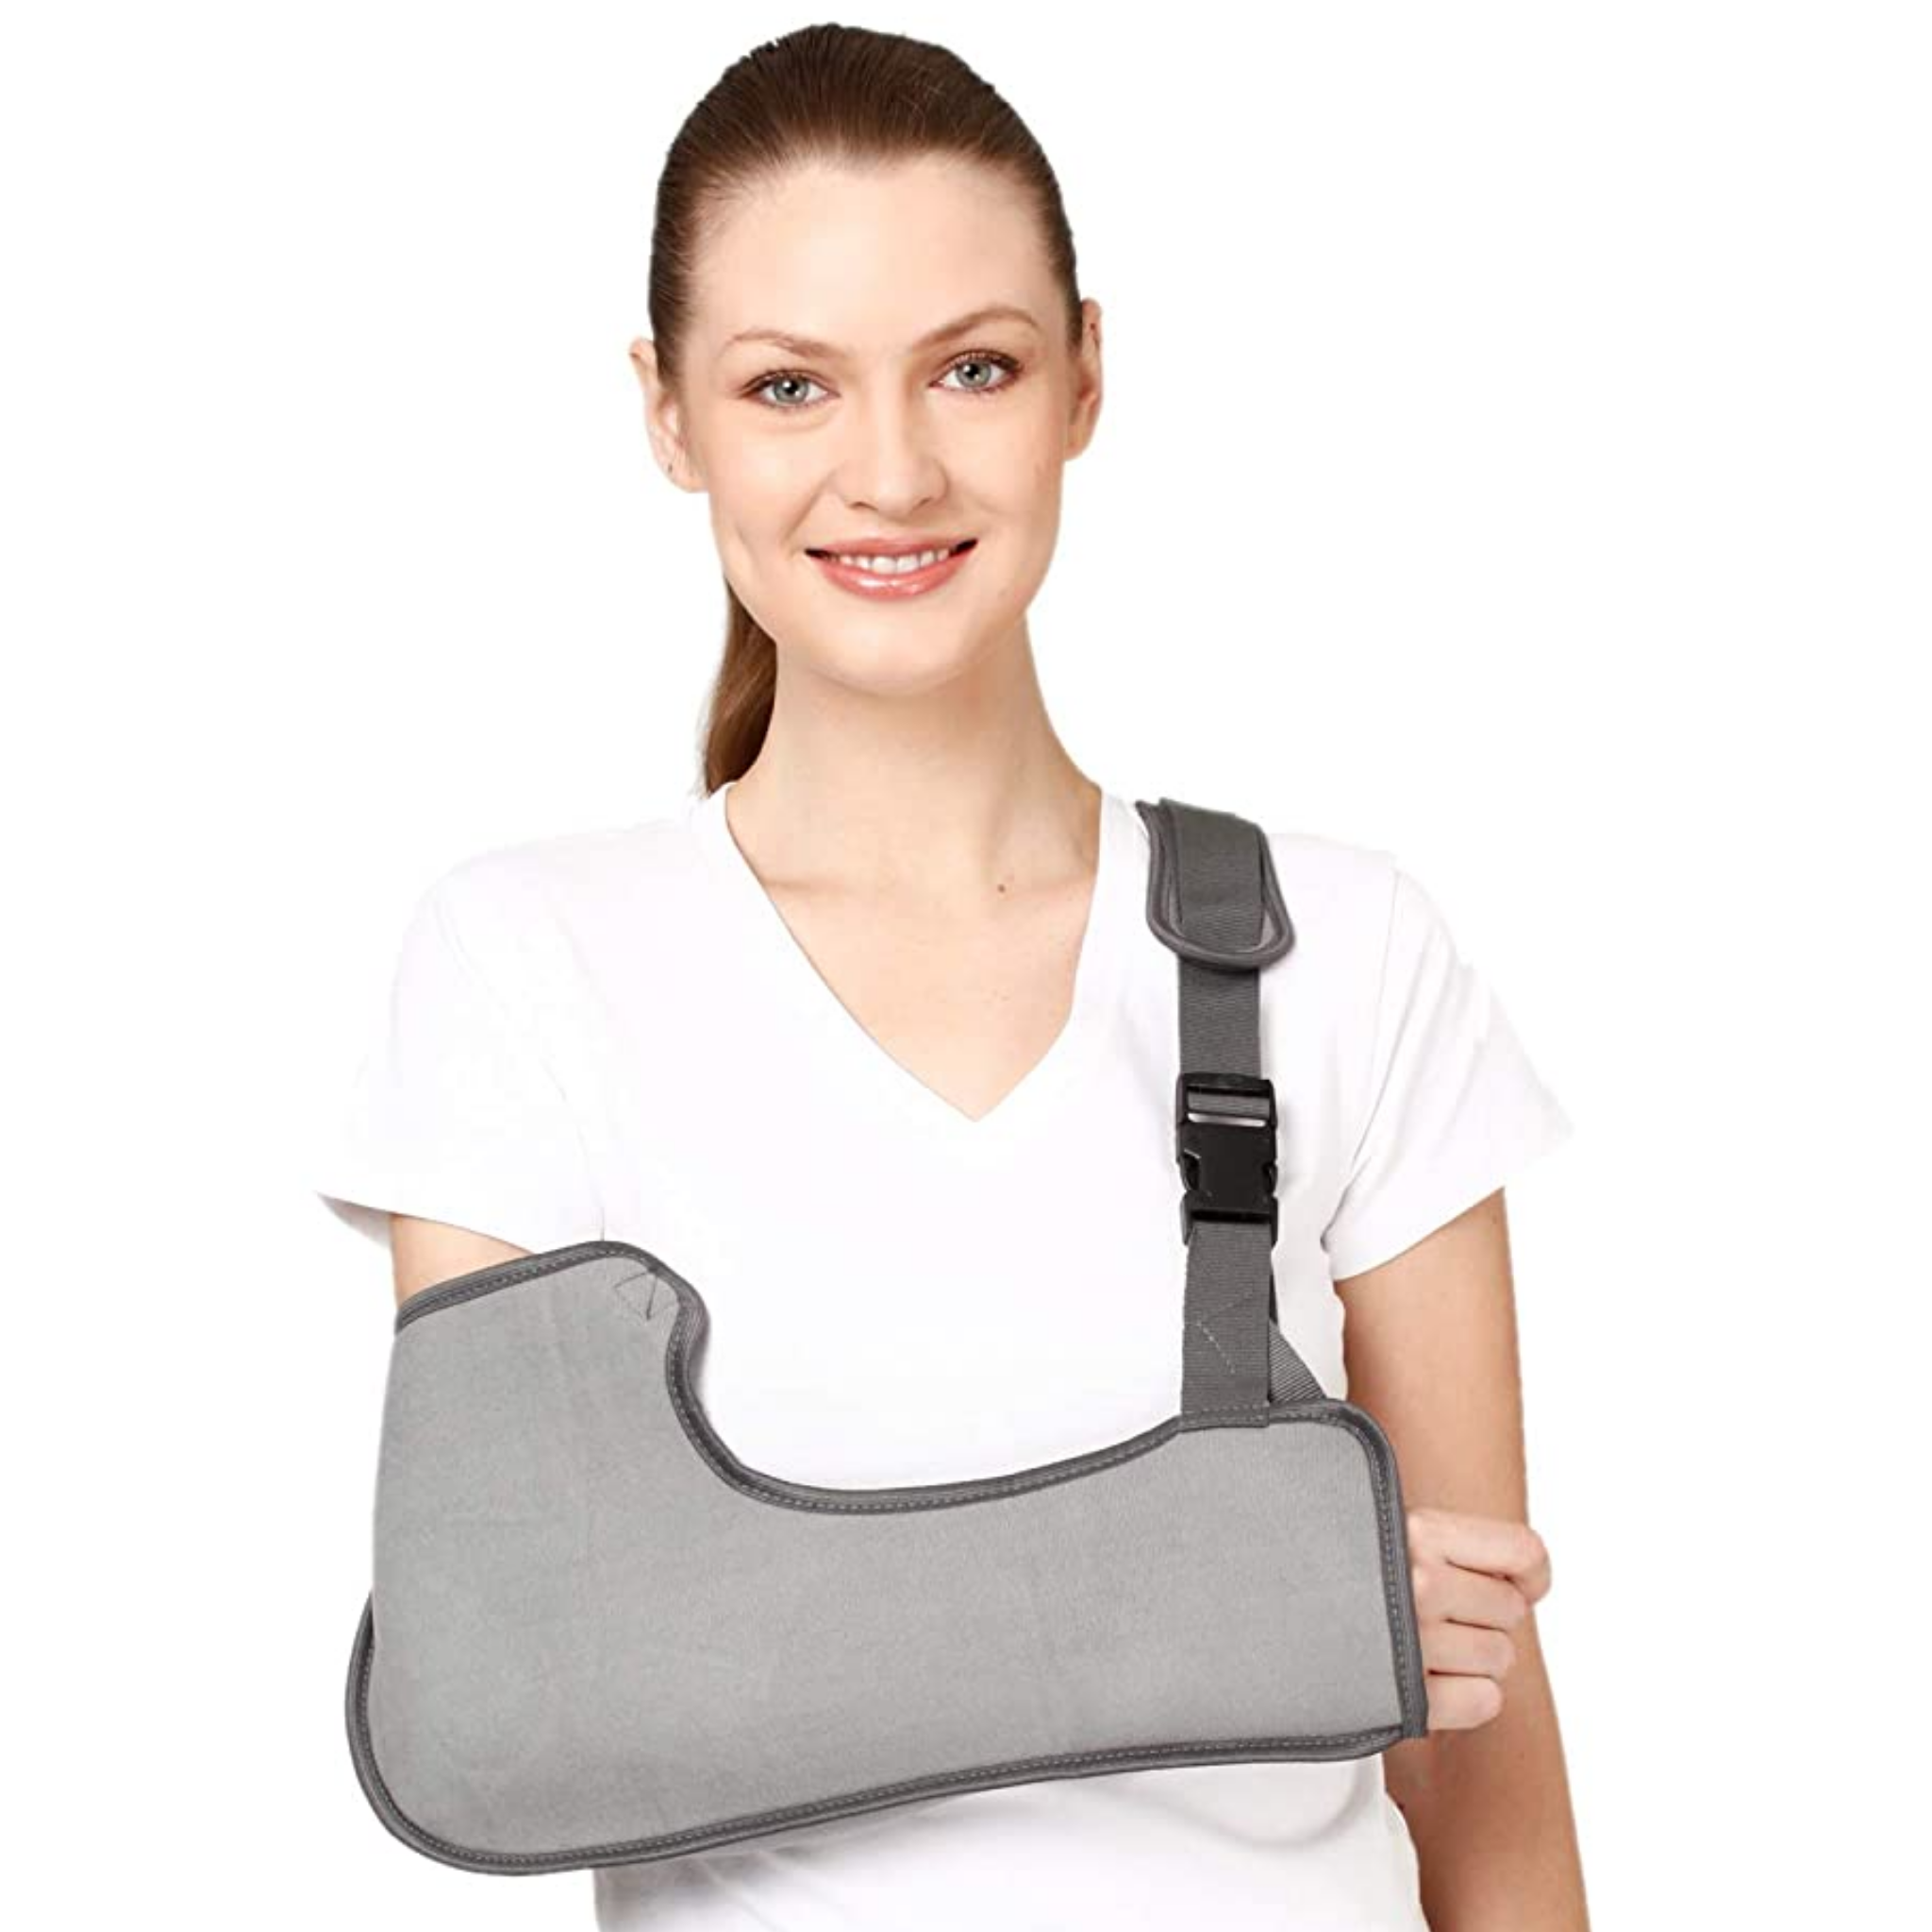 tynor arm sling pouch used as arm support pouch. shop arm sling pouch online at best price in chennai